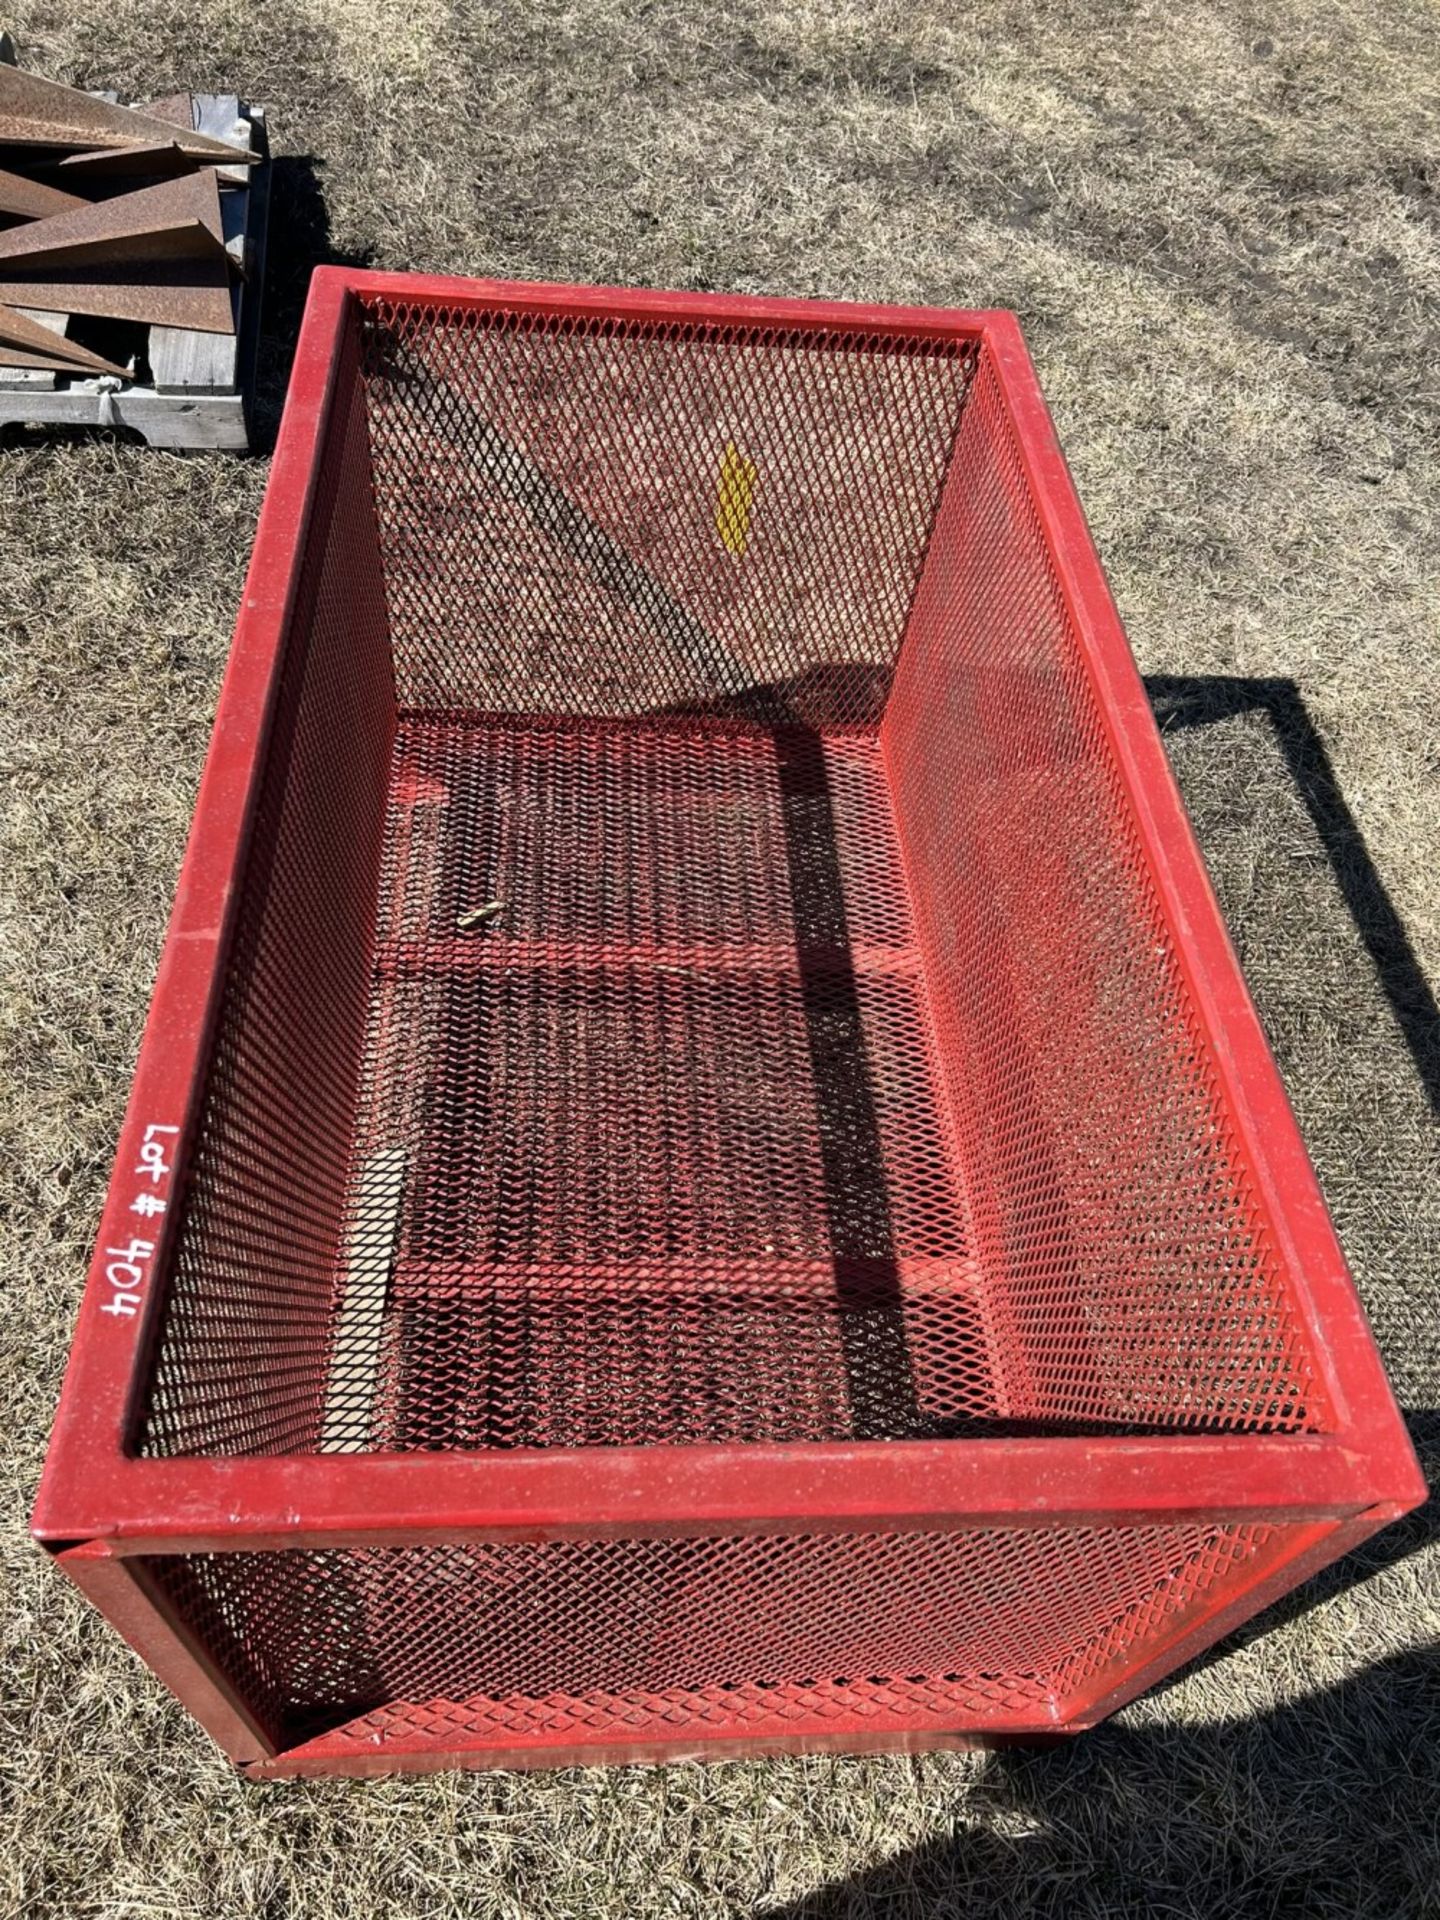 24"x48" RED STEEL MESH CRATE - Image 3 of 3